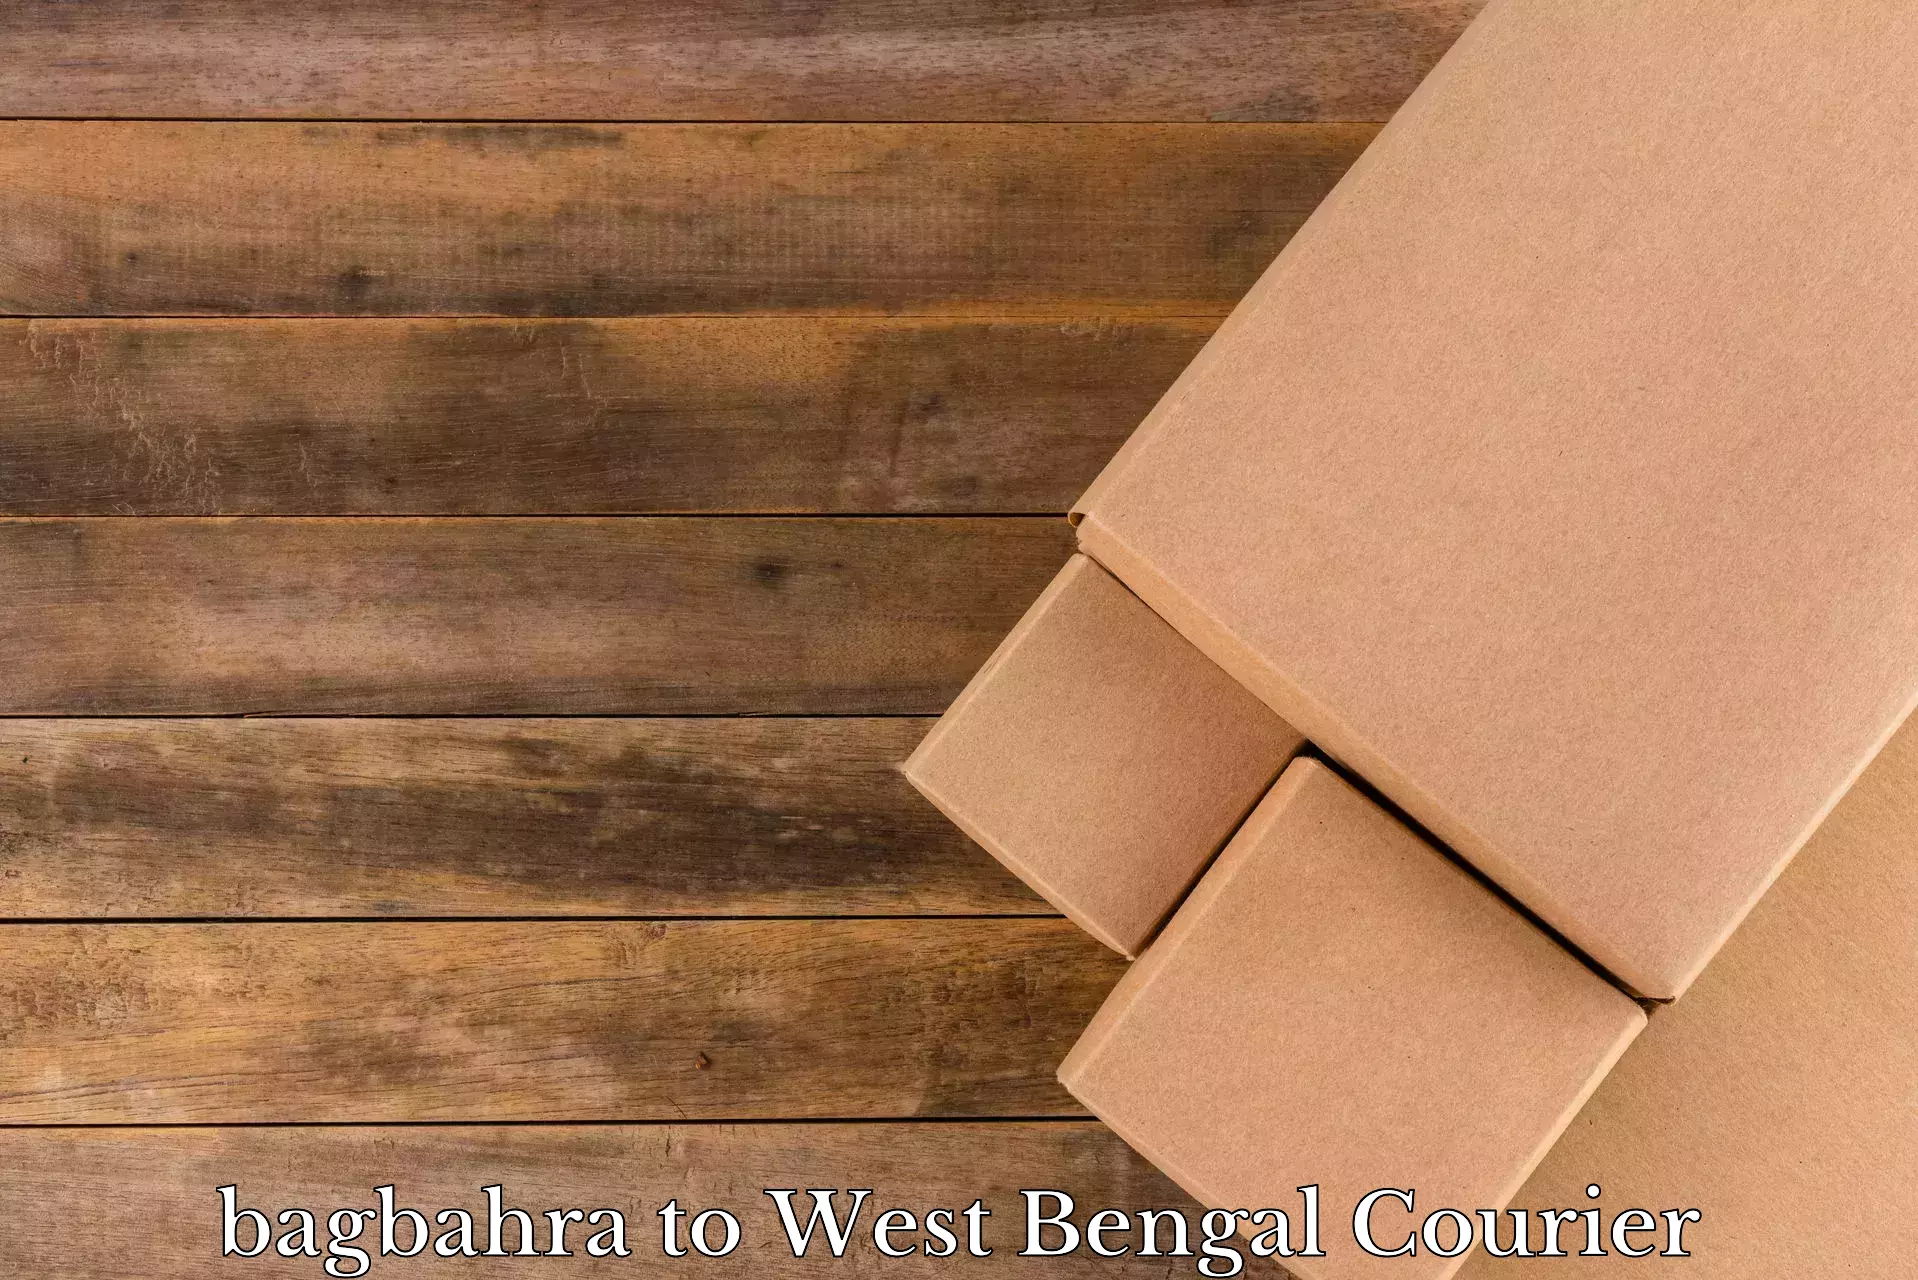 Trusted relocation experts bagbahra to West Bengal